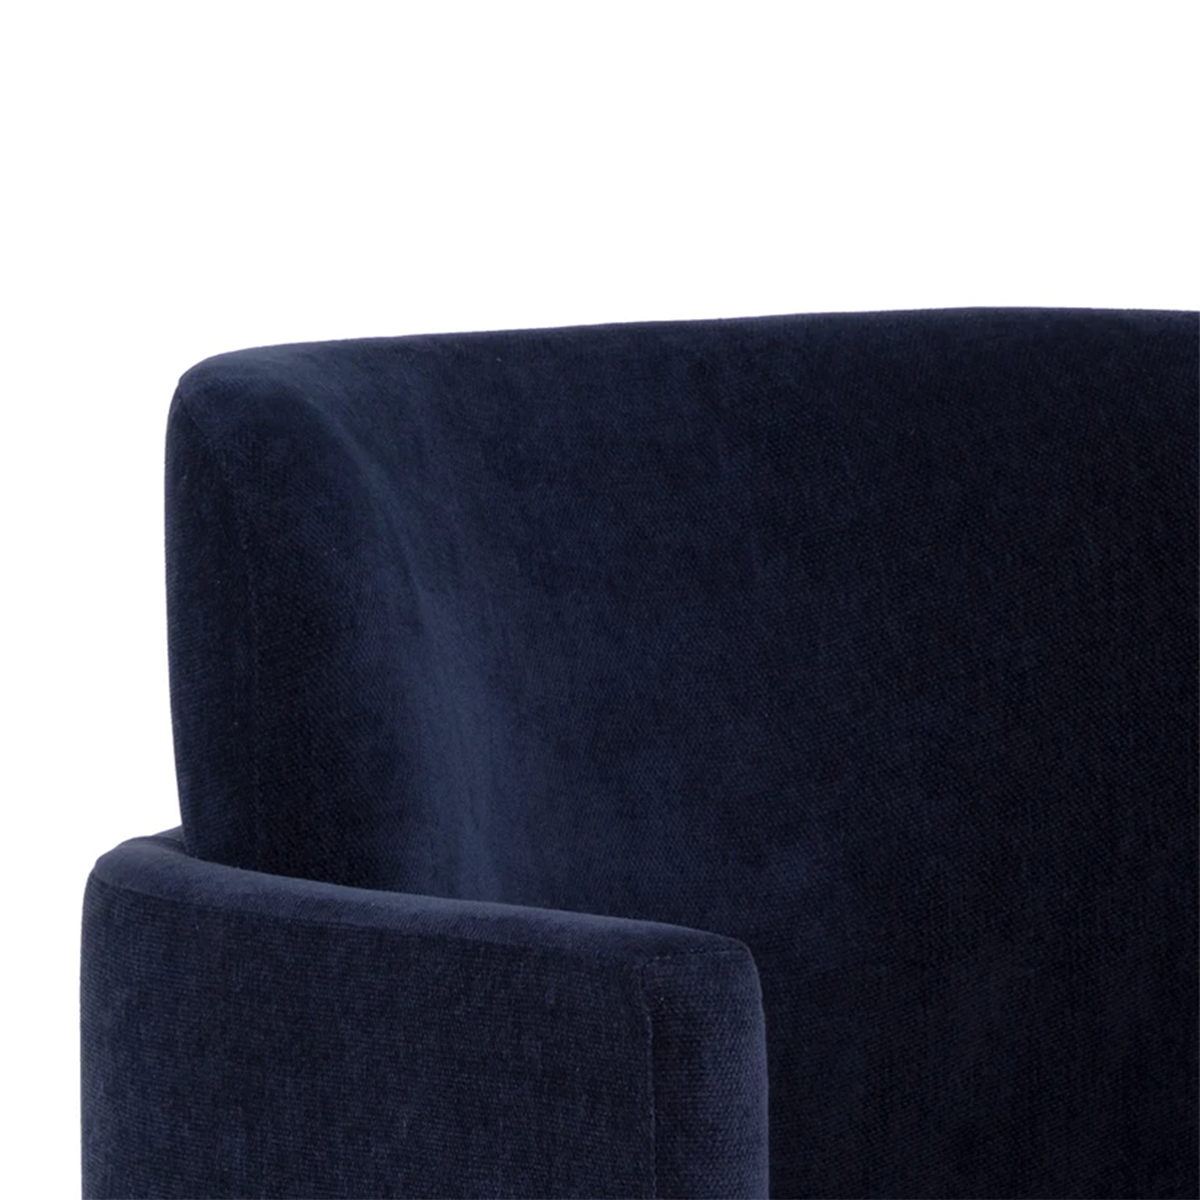 Richie Dining Armchair Blue, Close Image of the Material